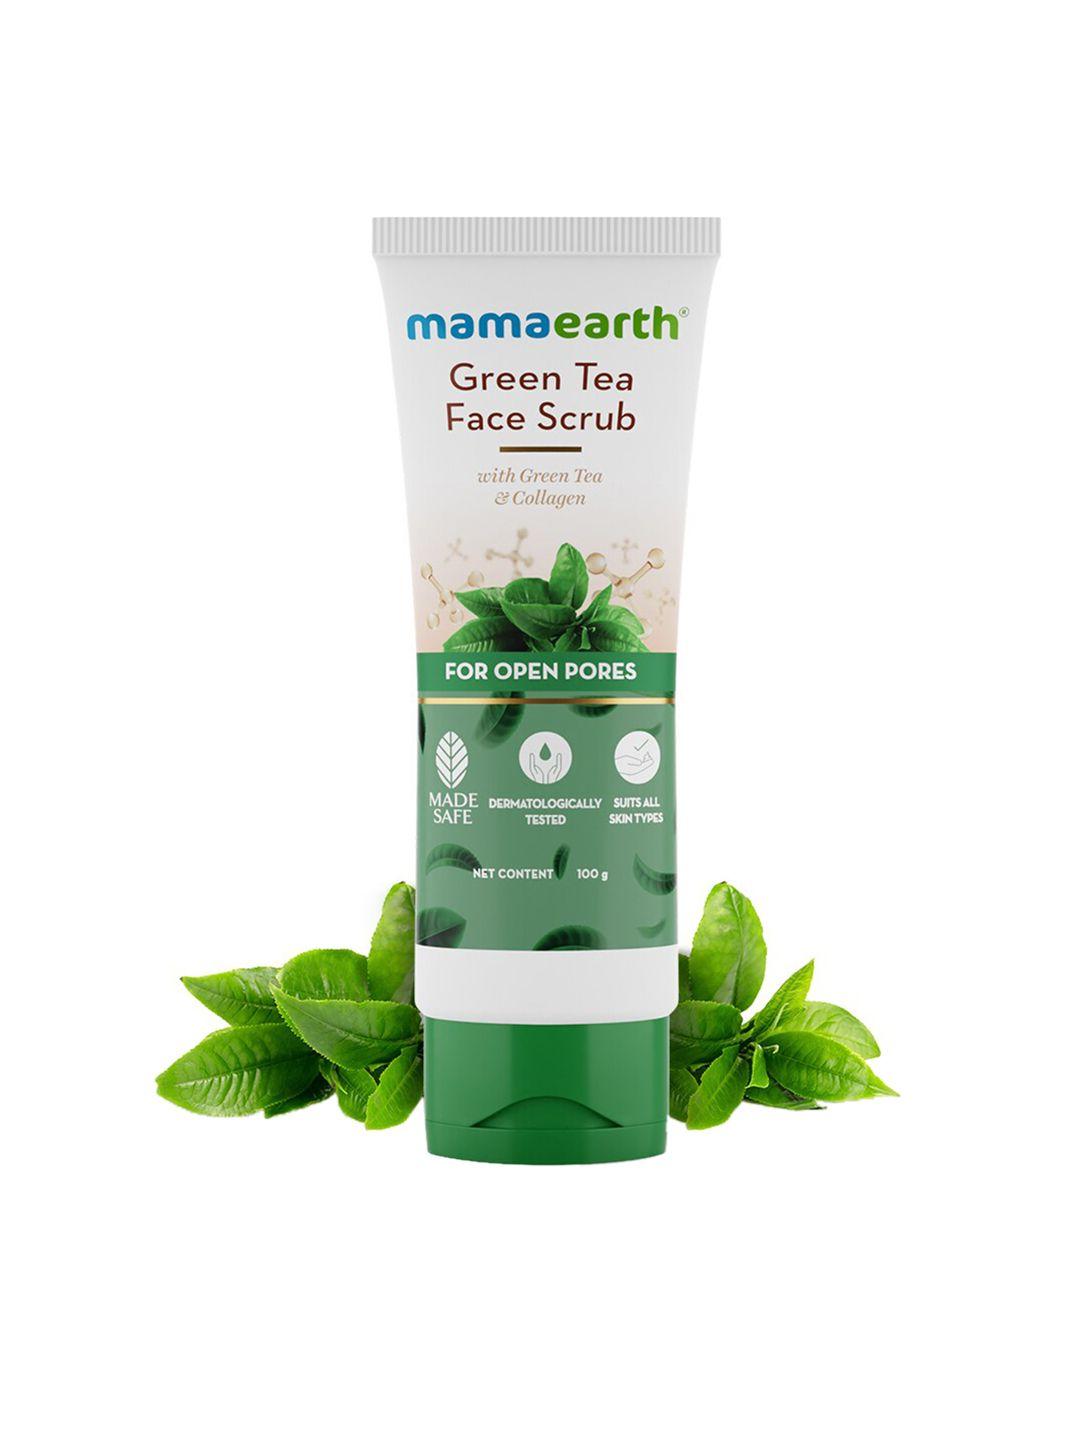 mamaearth green tea face scrub with collagen - 100 g